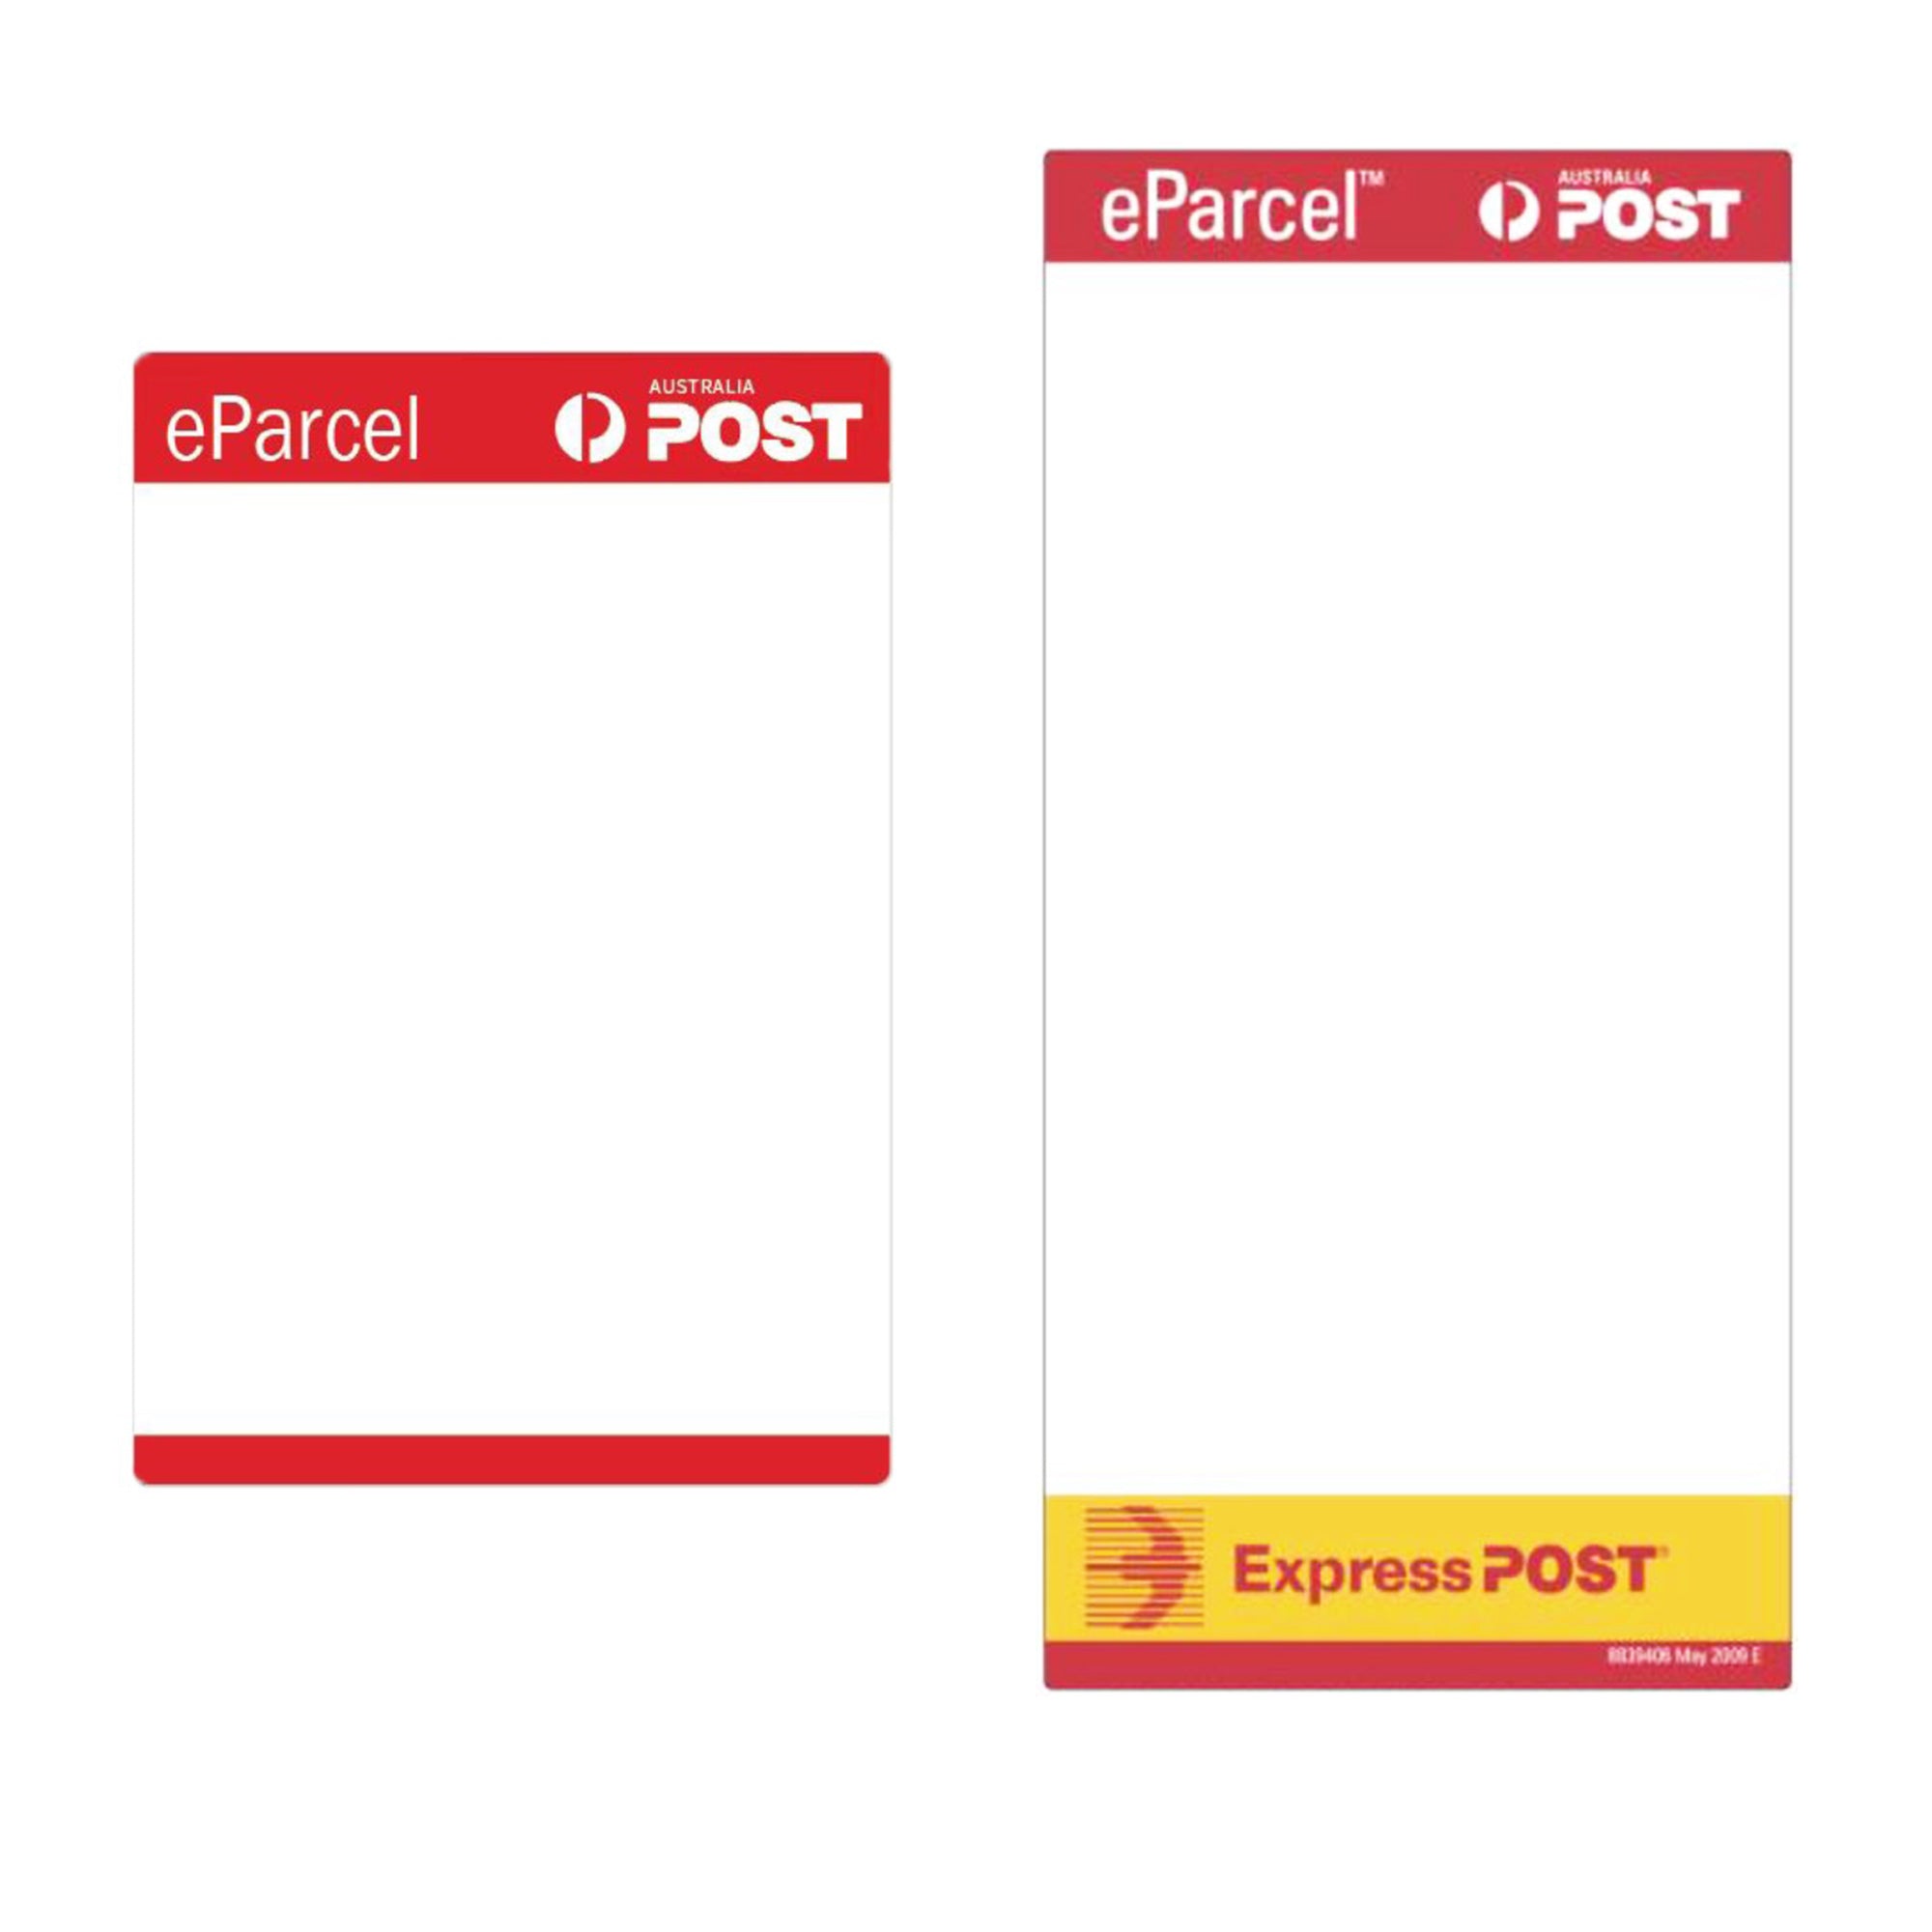 Why you should Use Pre-Printed Australia Post Labels for Express Post and eParcel Parcel Post